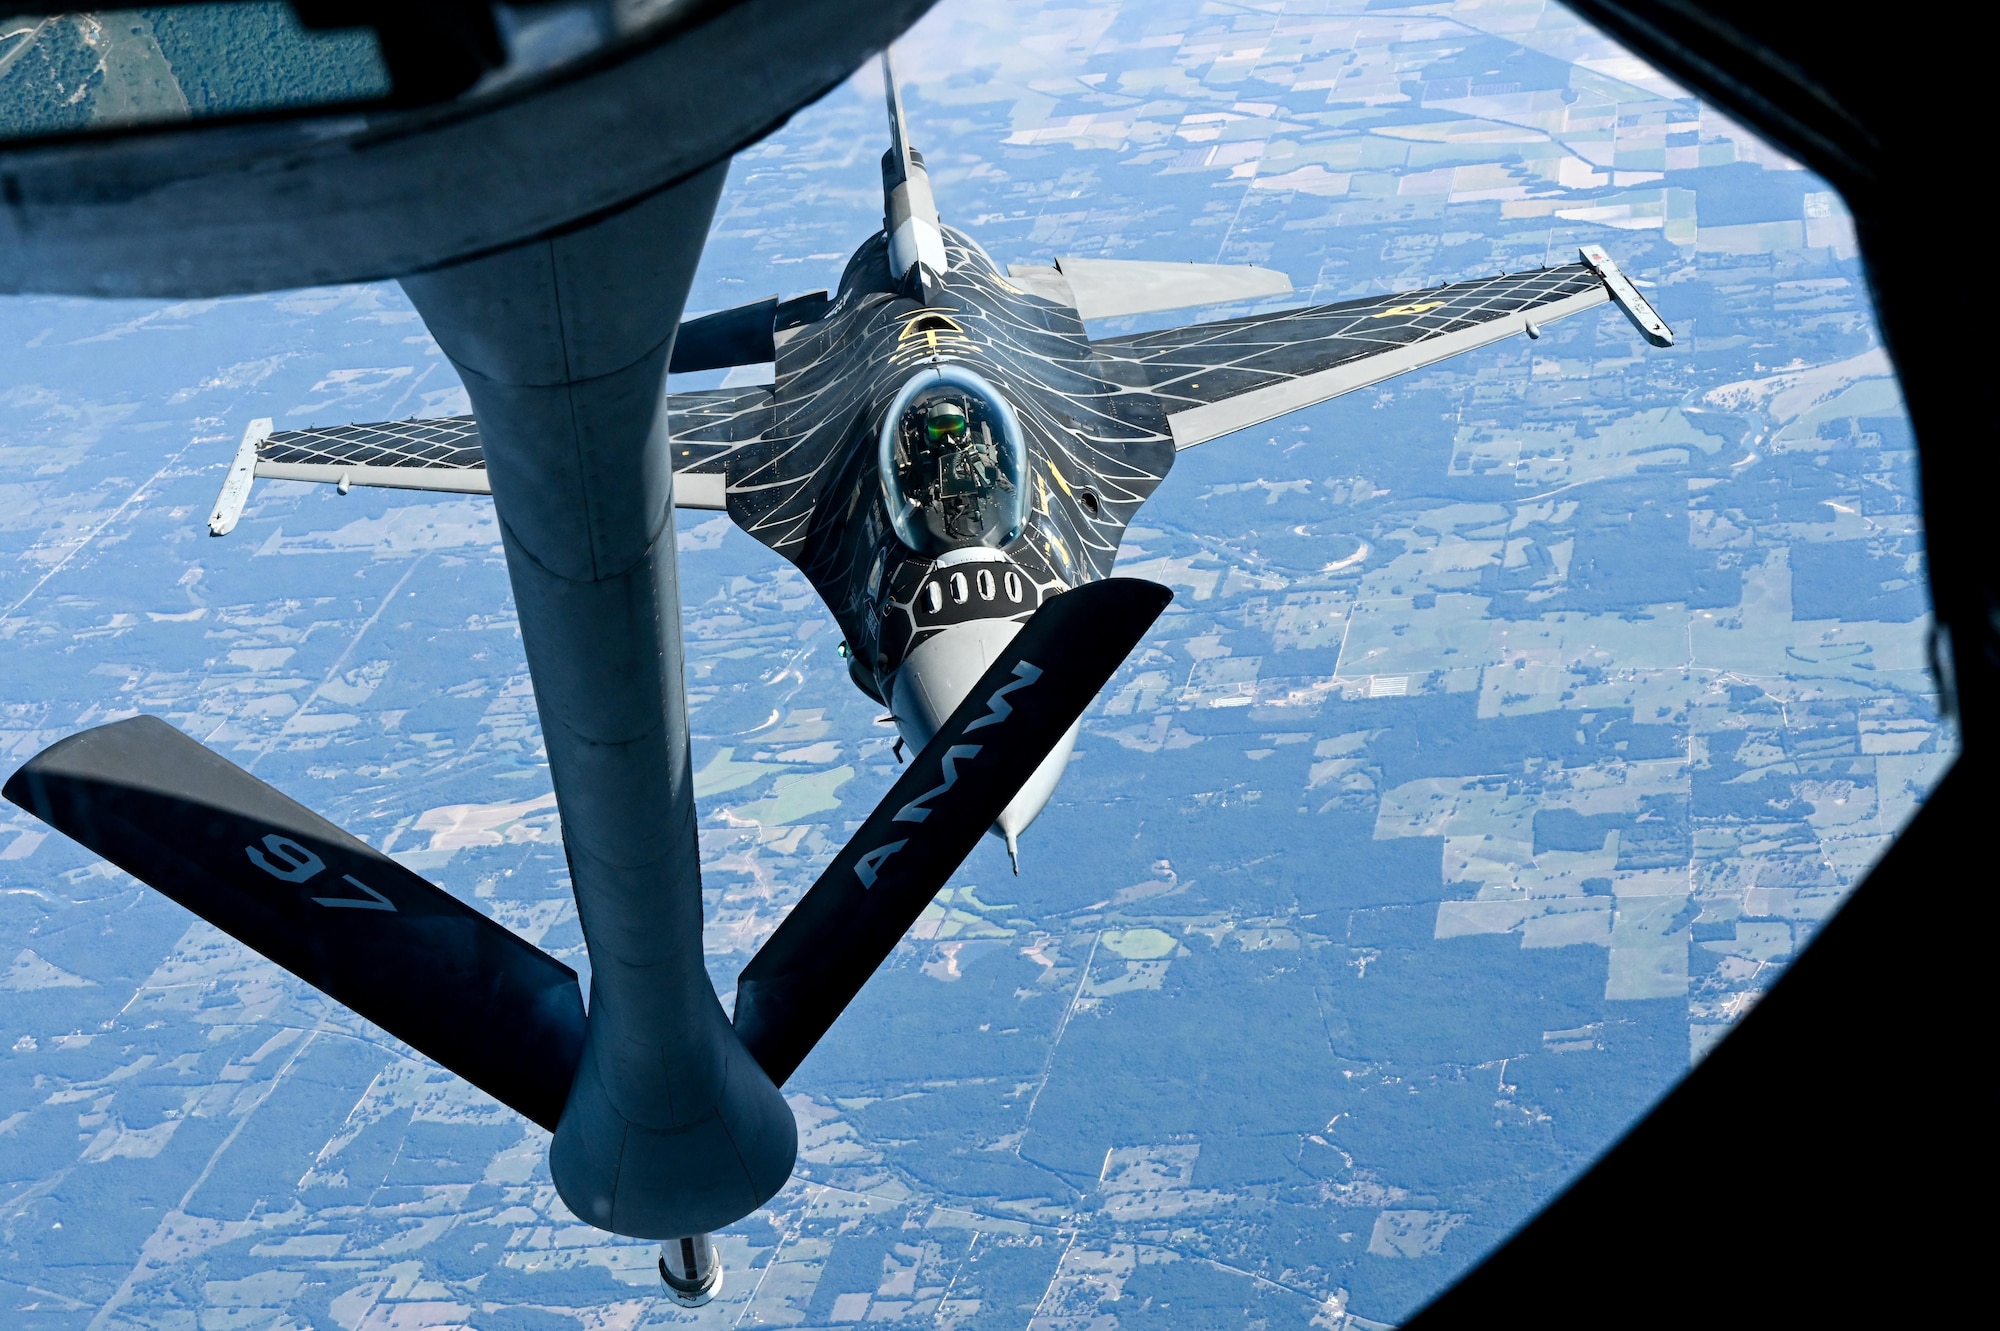 An F-16 Fighting Falcon with the Viper Demonstration Team at Shaw Air Force Base (AFB), South Carolina, receives fuel from a KC-135 Stratotanker from Altus AFB, Oklahoma, Sept. 29, 2022. The Viper Demonstration Team includes a single-ship F-16 known as “Viper” flown by Capt. Aimee ‘Rebel’ Fiedler, supported by nine other Airmen on the team. (U.S. Air Force photo by Senior Airman Kayla Christenson)